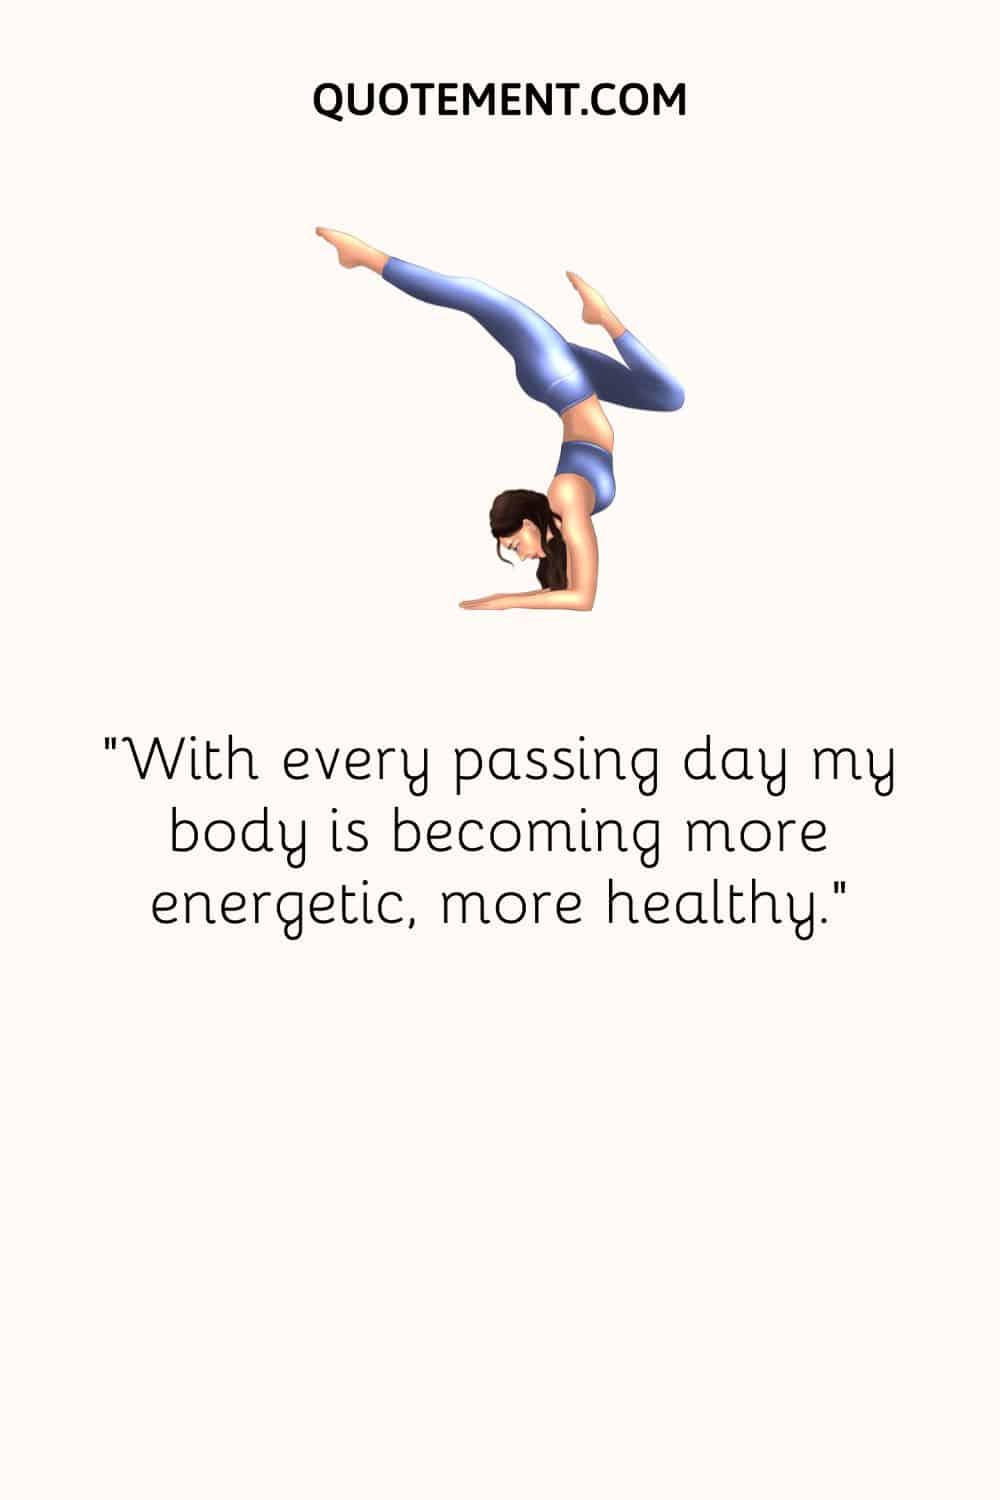 With every passing day my body is becoming more energetic, more healthy